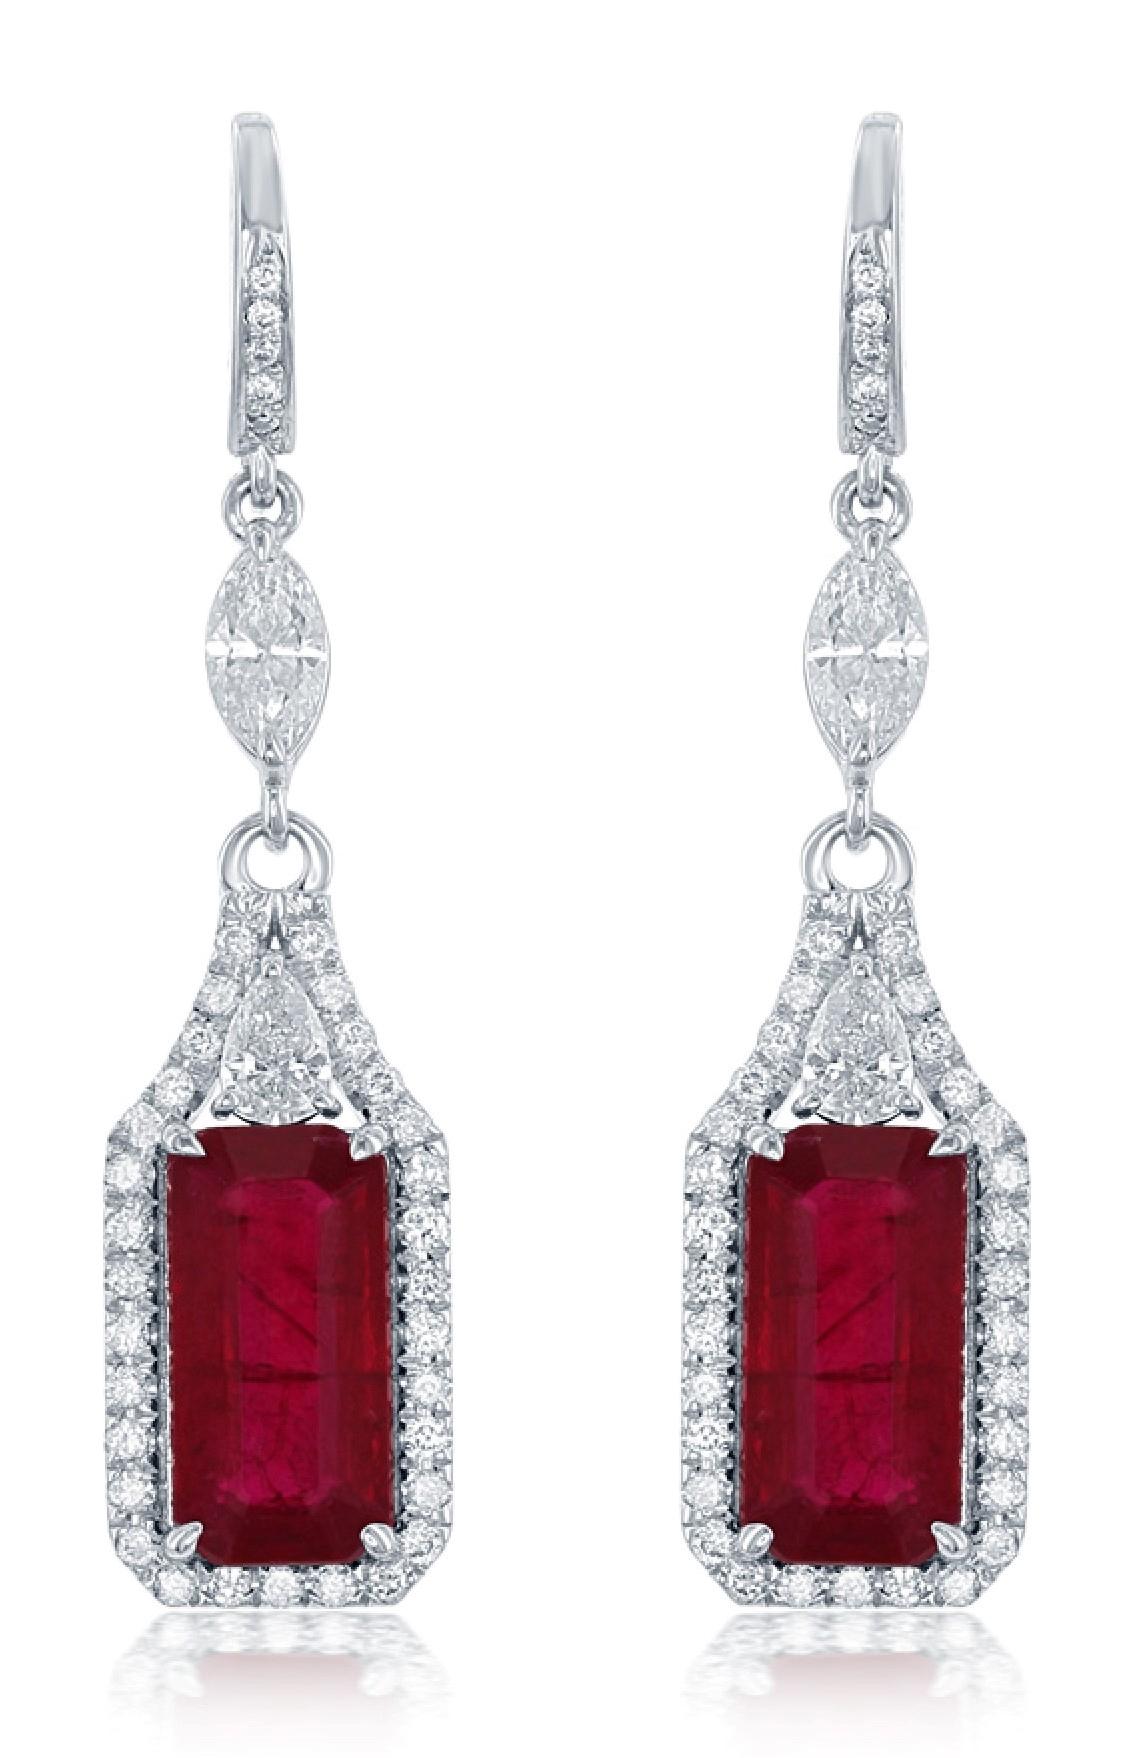 5.10 Carat Emerald Cut Ruby Earrings with 1.45ct of Diamonds in 18kt White Gold In New Condition For Sale In New Orleans, LA